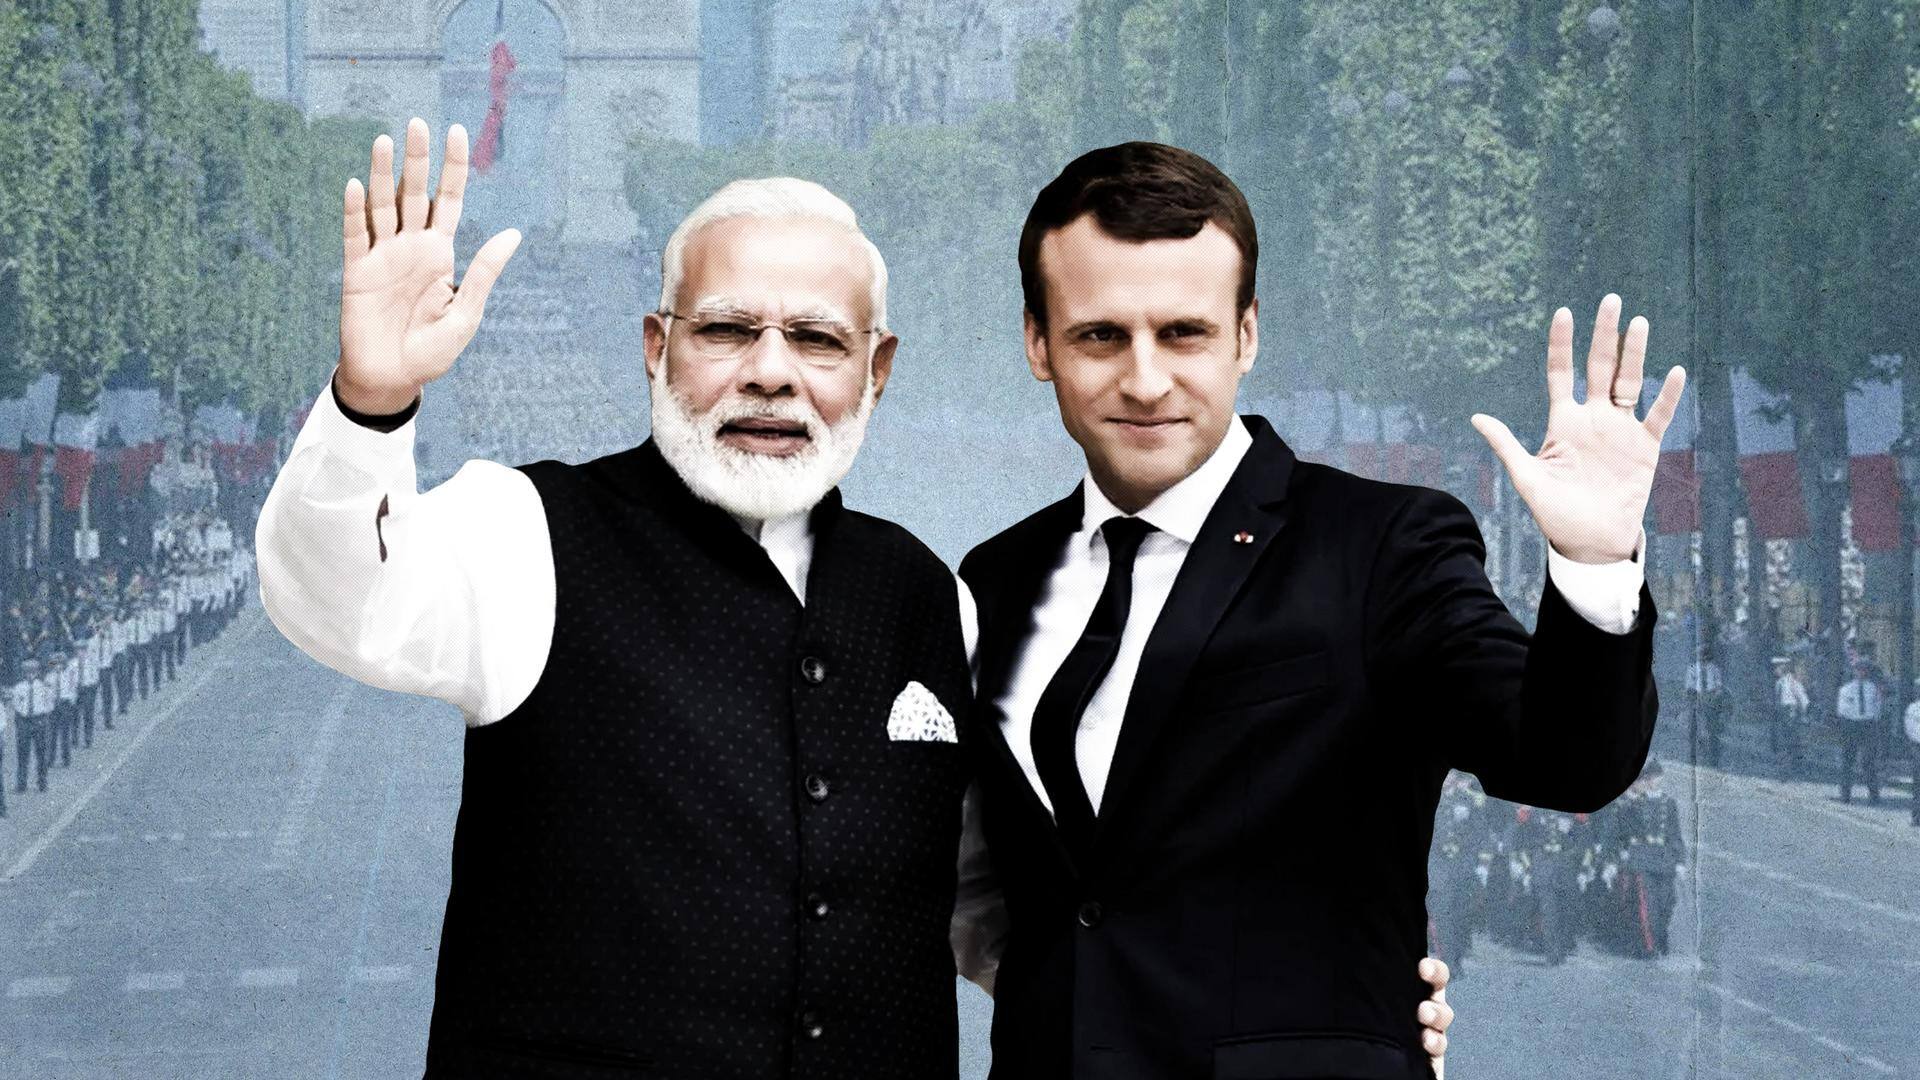 After India-France Rafael deal, PM Modi attends Bastille Day parade